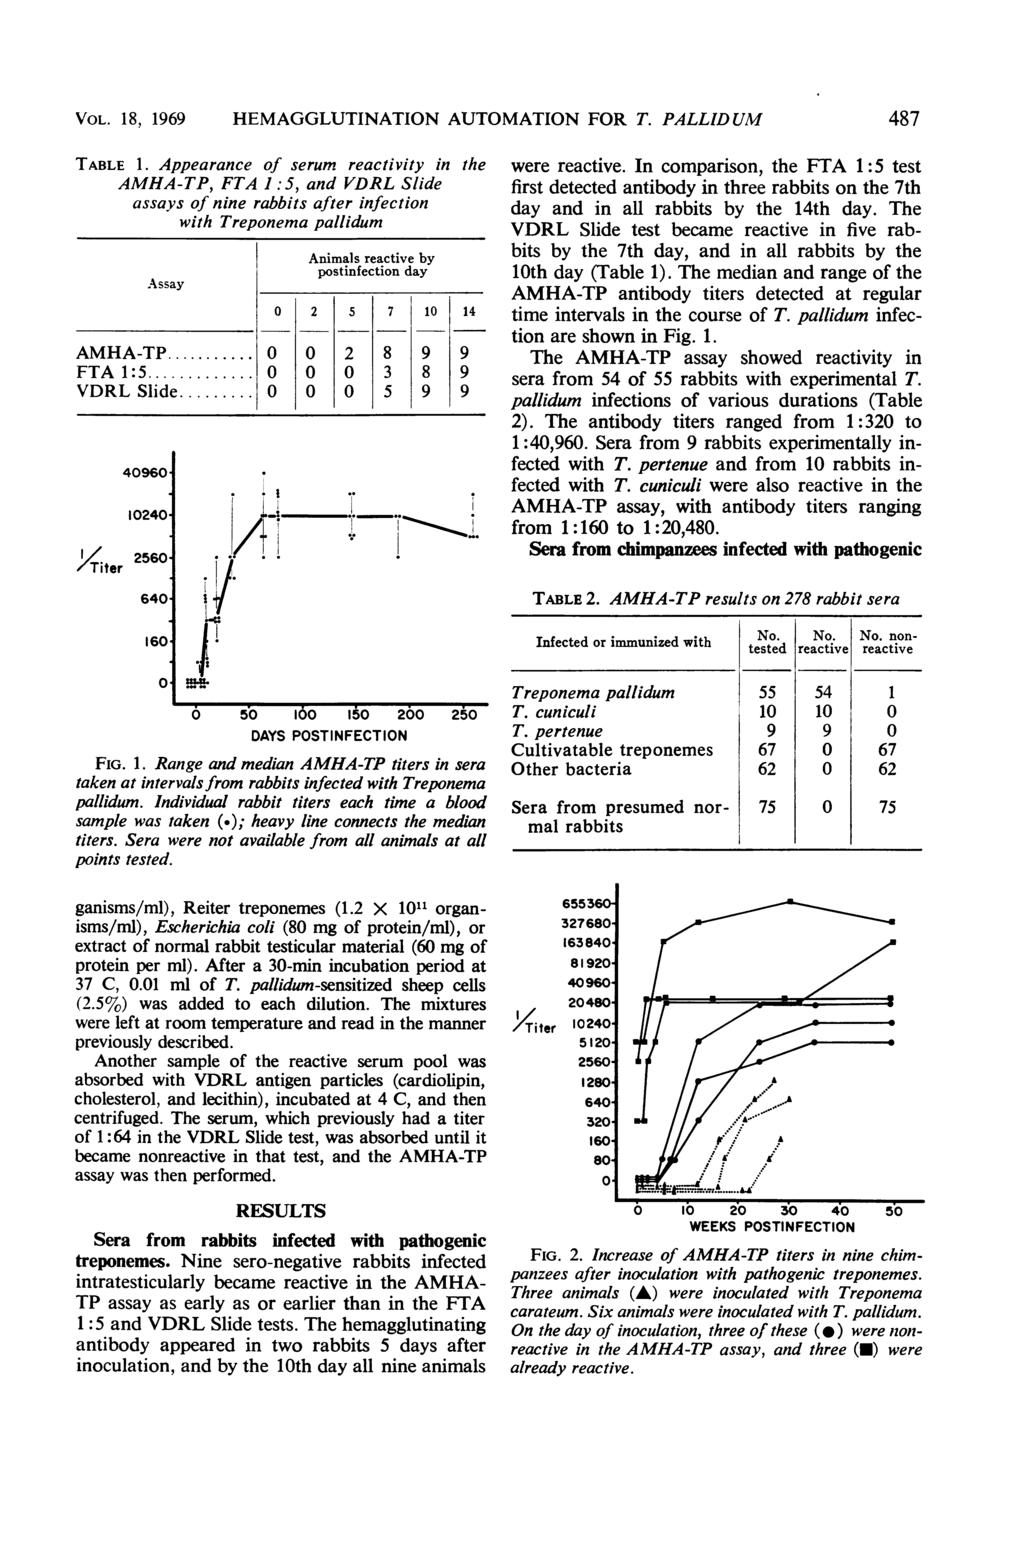 VOL. 18, 1969 HEMAGGLUTINATION AUTOMATION FOR T. PALLIDUM 487 TABLE 1.